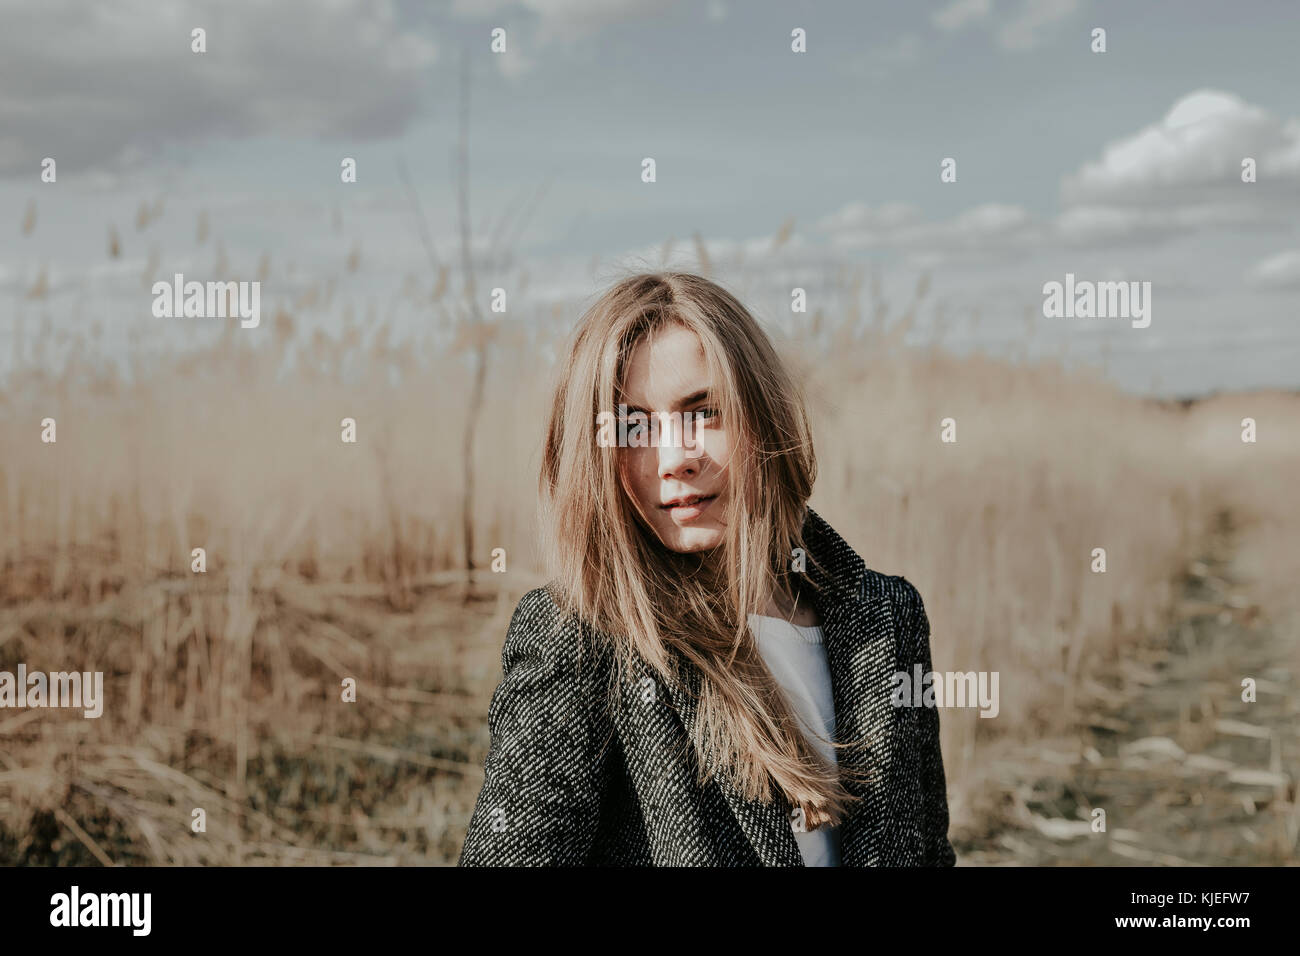 Pretty and young european woman with face covered  by her blonde hair looking at camera. Girl posing outdoor on bulrush background. Close shot. Stock Photo